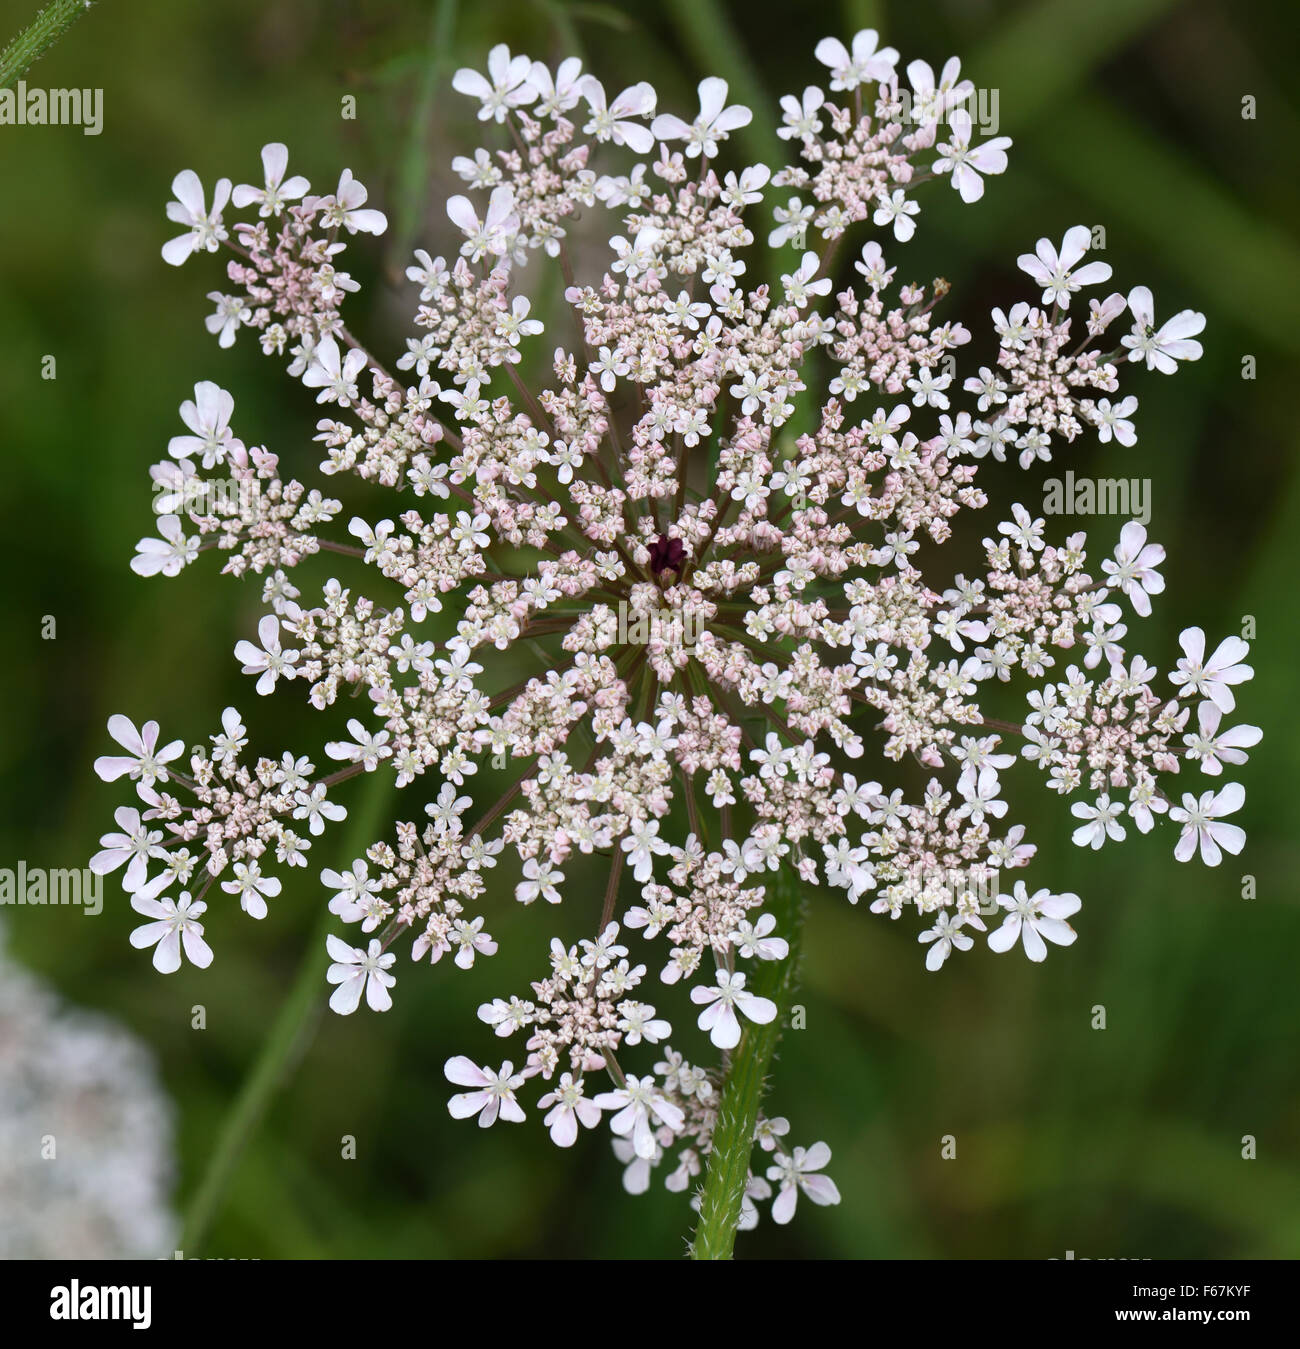 White umbel of a flowering wild carrot, Daucus carota, with a central deep red or maroon floret, Berkshire, August Stock Photo